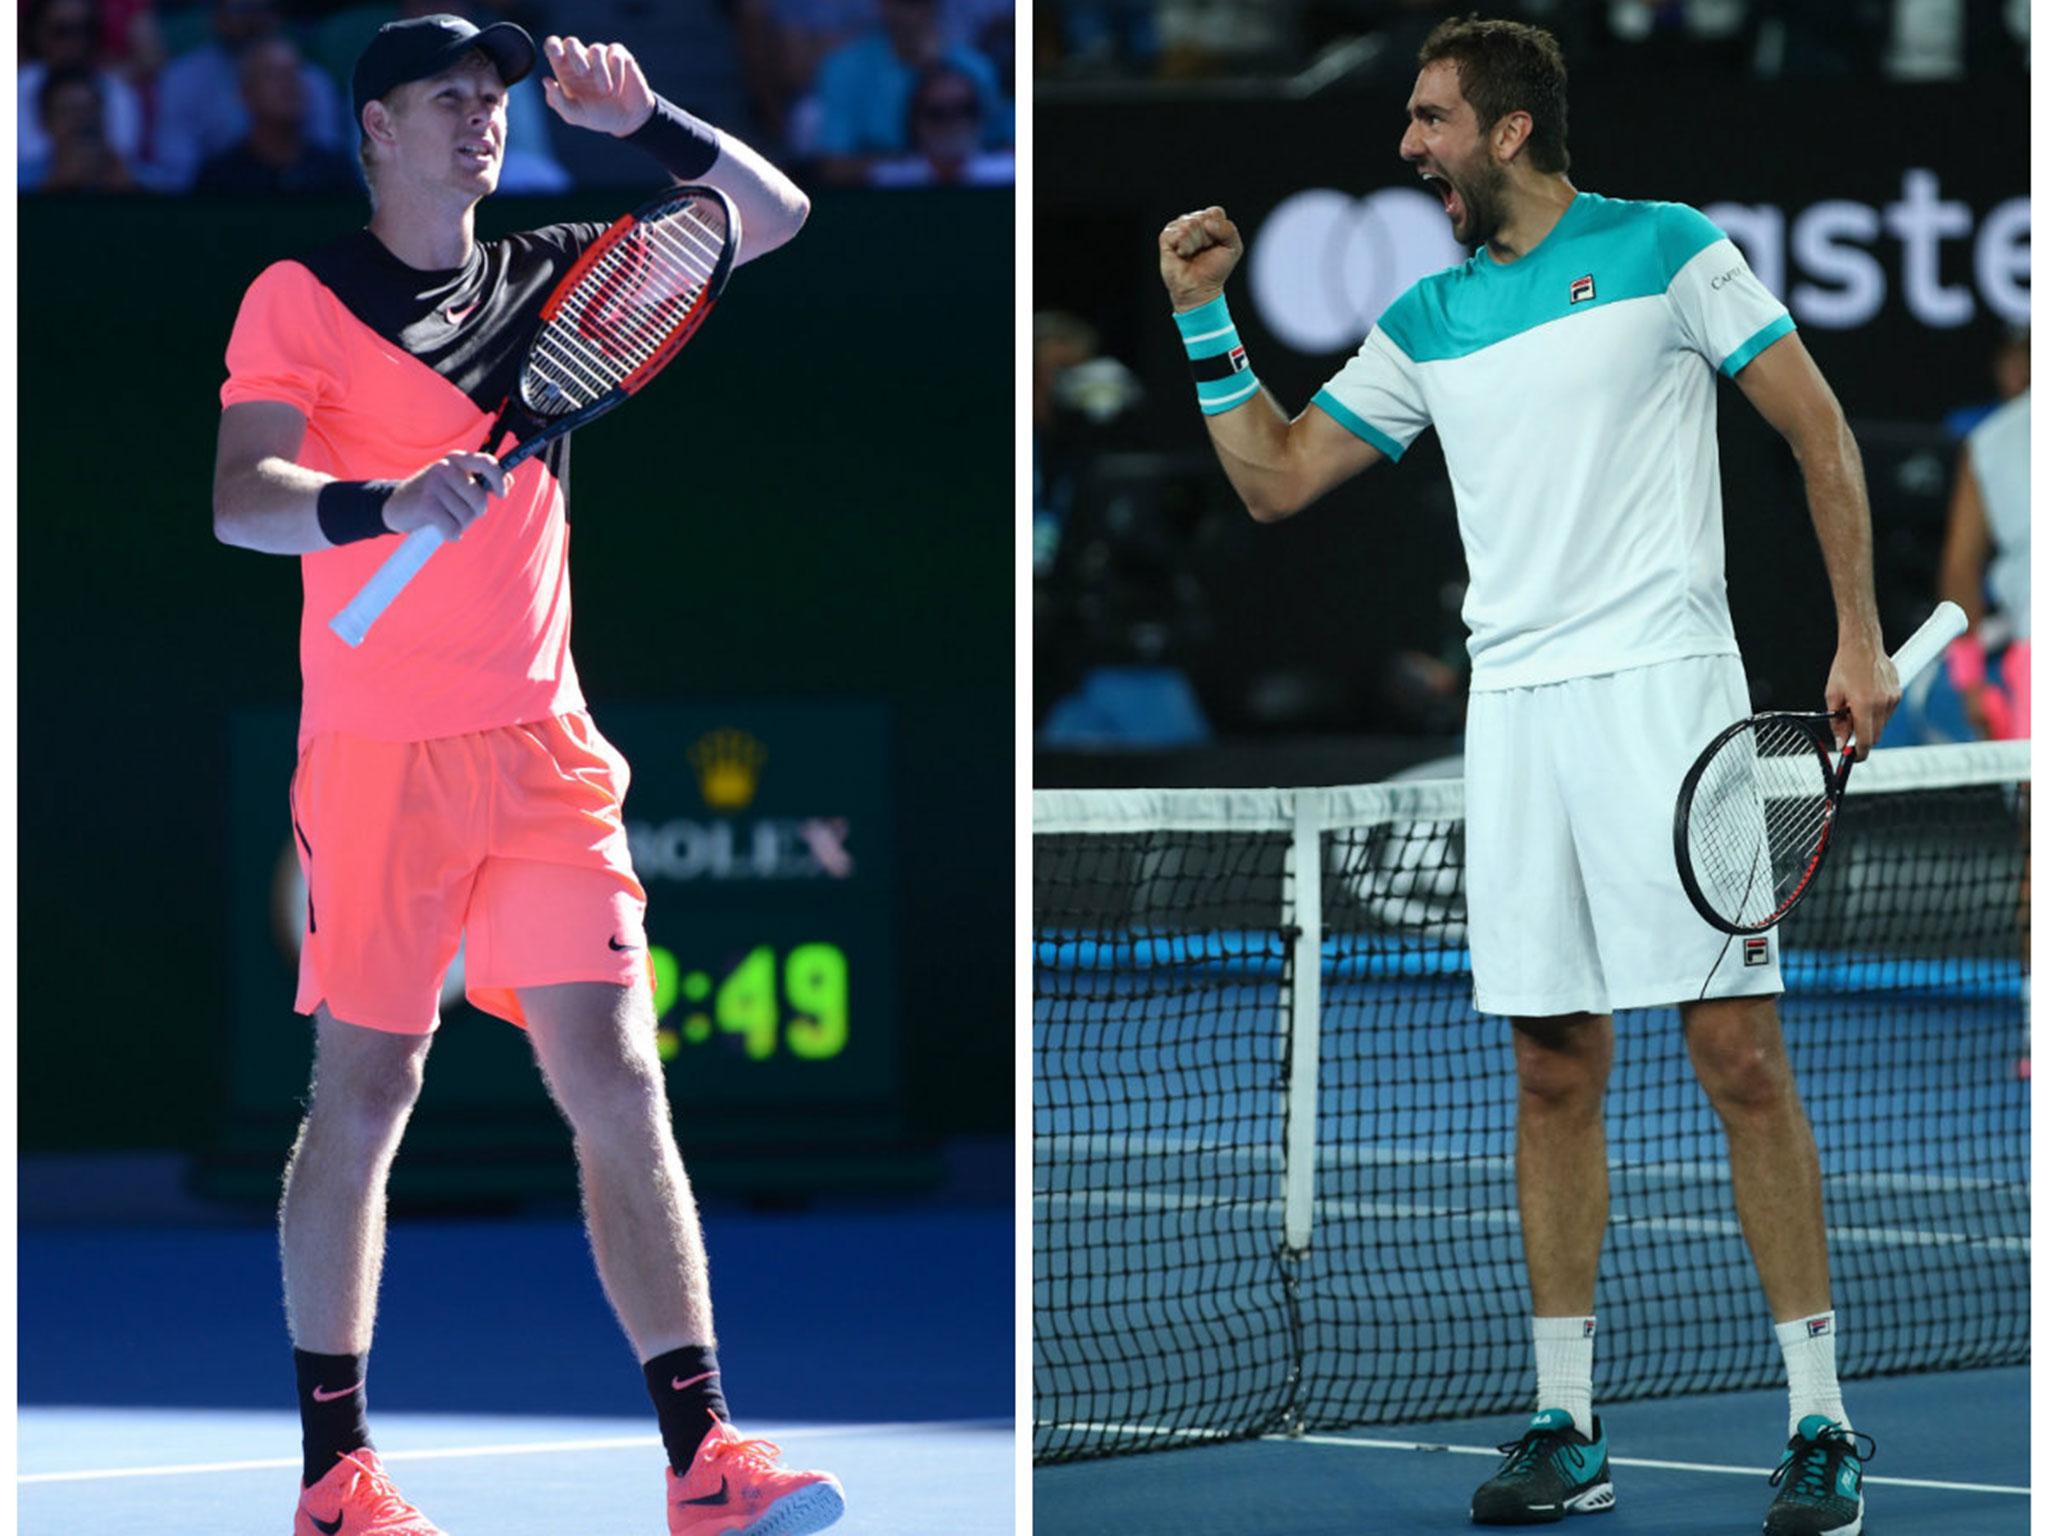 Kyle Edmund vs Marin Cilic Australian Open semi-final, what time does it start and where can I watch it? The Independent The Independent